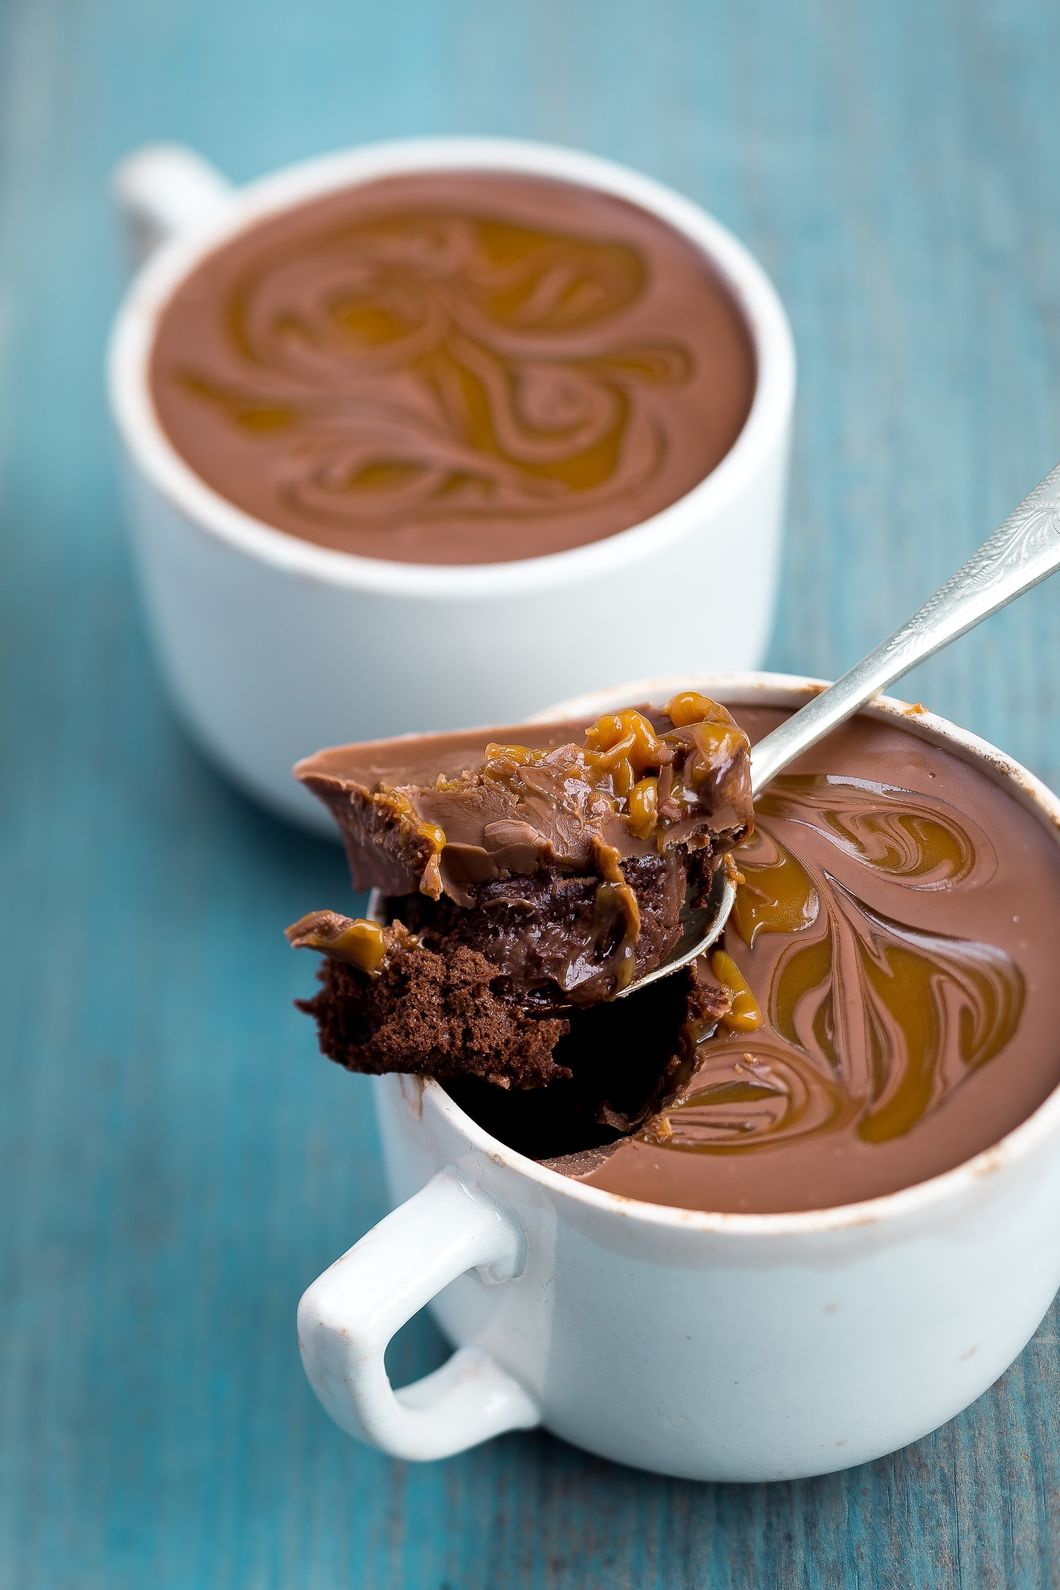 10 Pinterest-Inspired Mug Desserts So Good, You Won't Want To Share With Anyone But Instagram